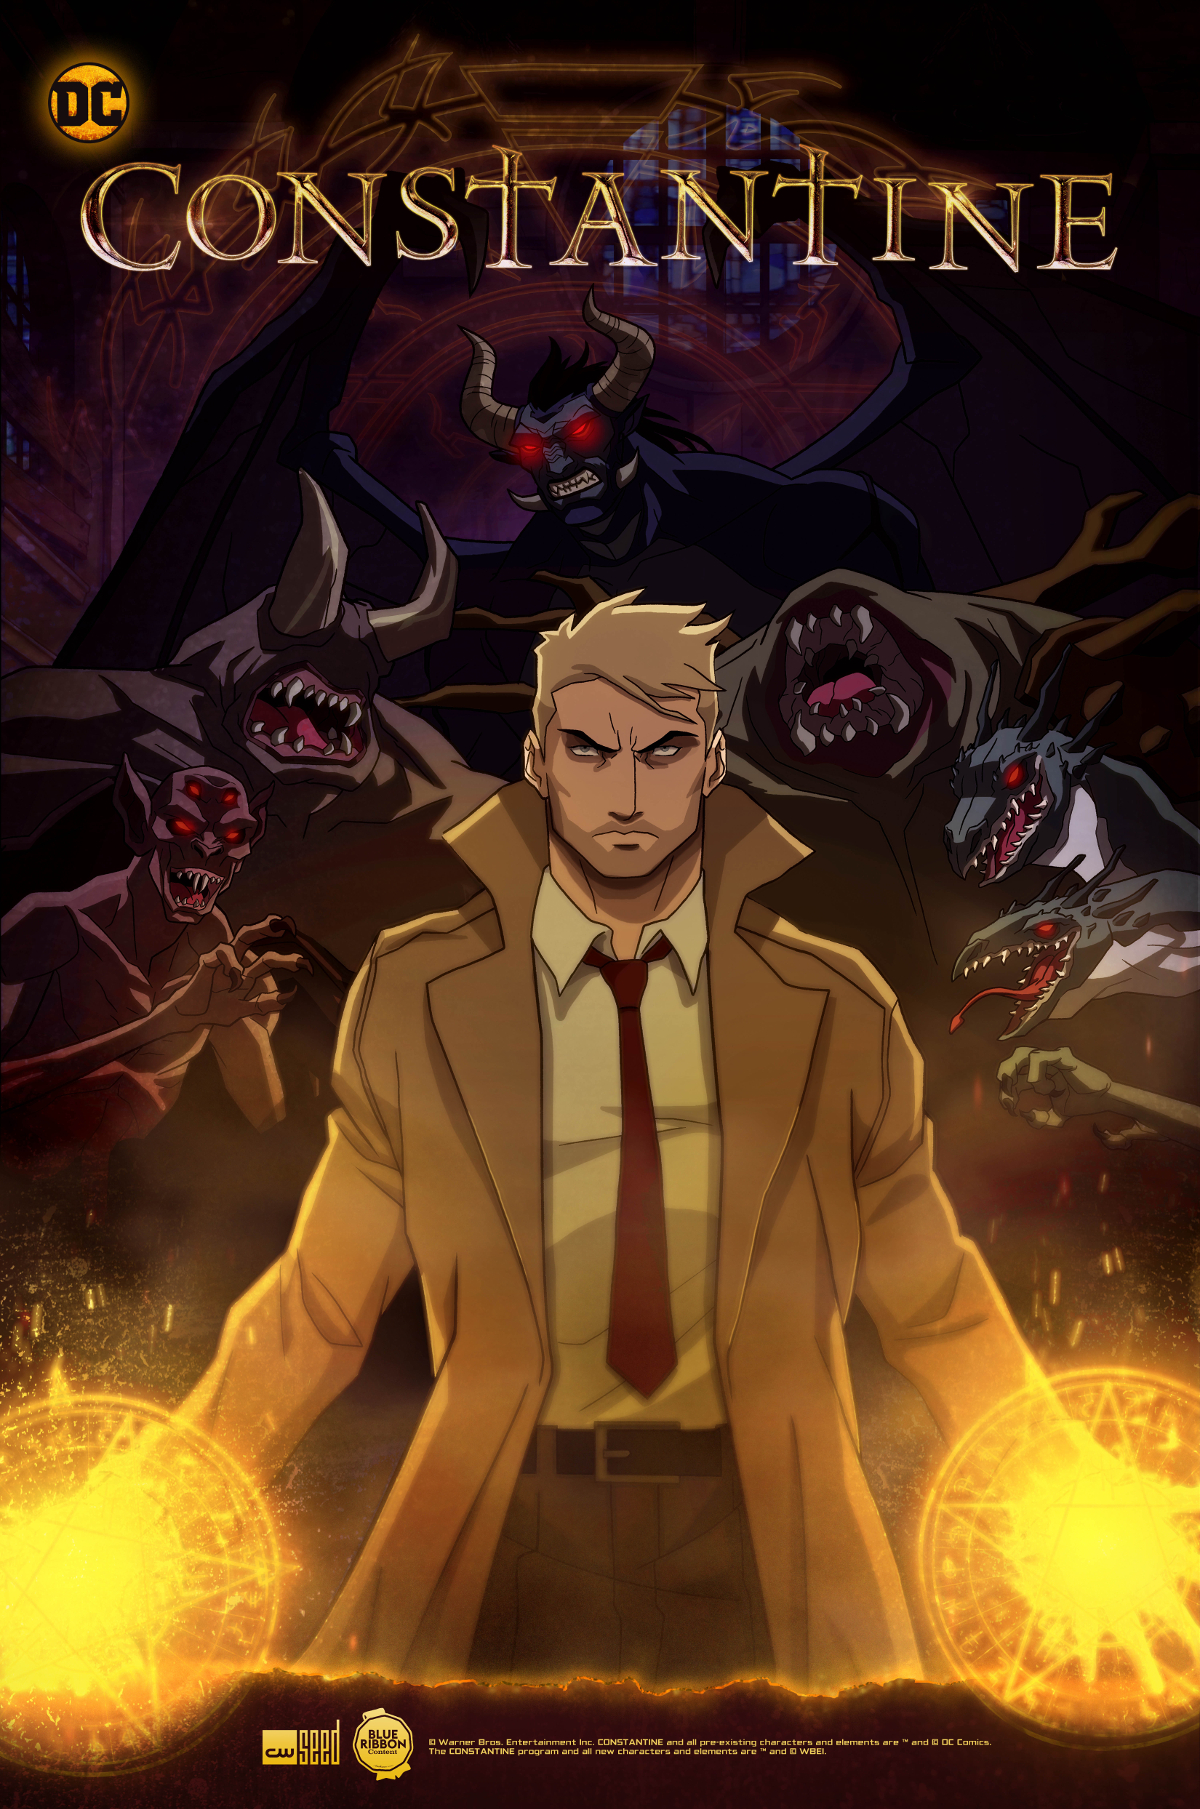 constantine-animated-series-poster-artwork-cw-seed-1032167